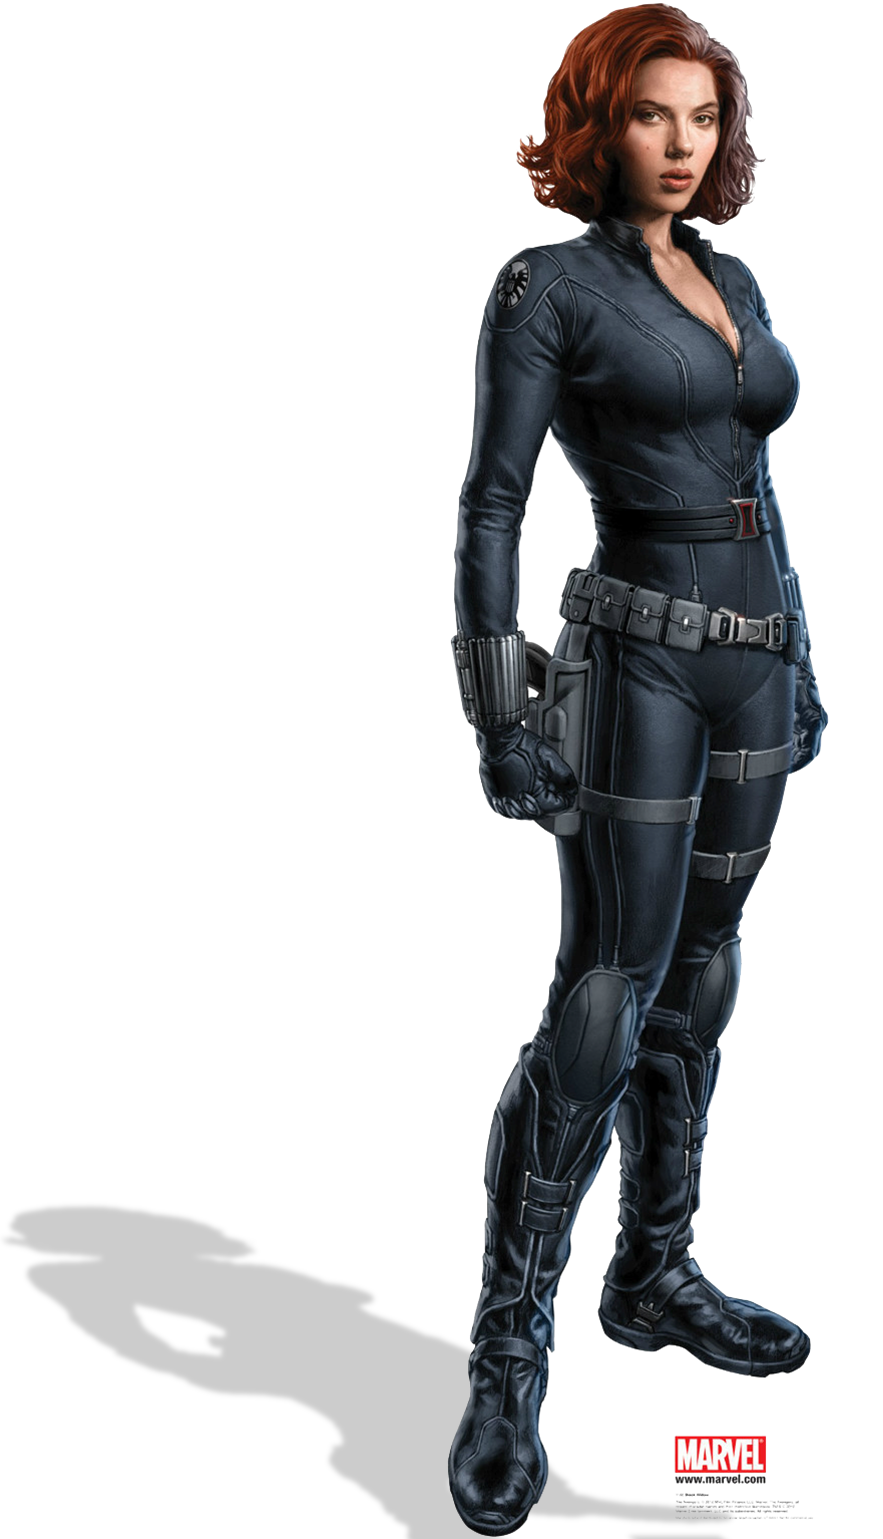 Black Widow Png Image Png Image - Black Widow, Transparent background PNG HD thumbnail